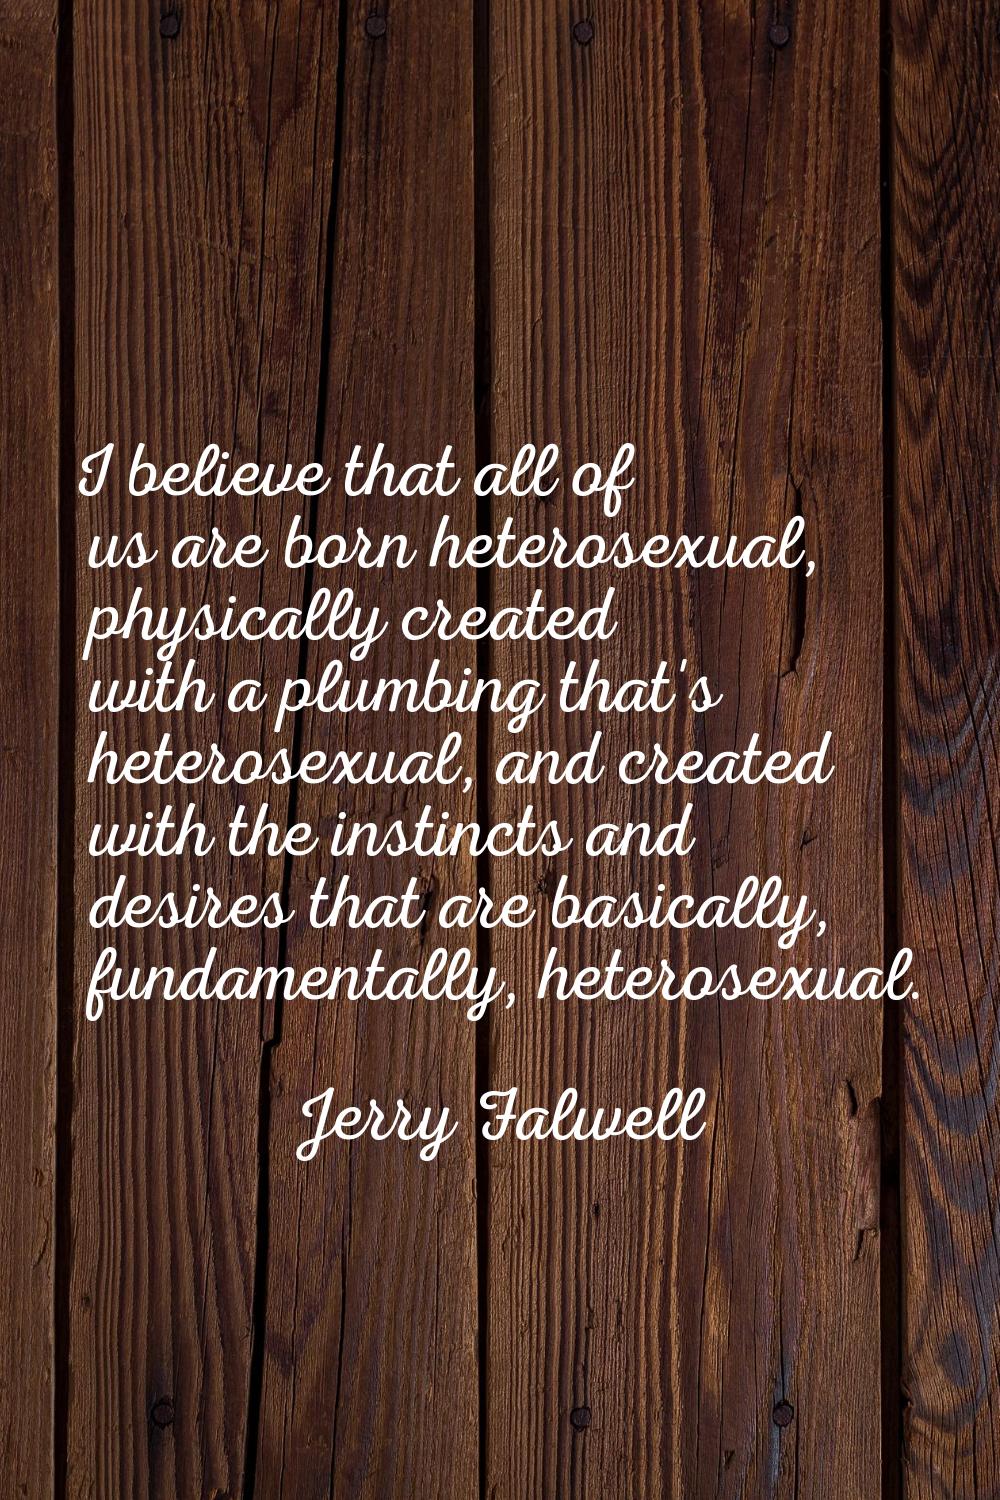 I believe that all of us are born heterosexual, physically created with a plumbing that's heterosex